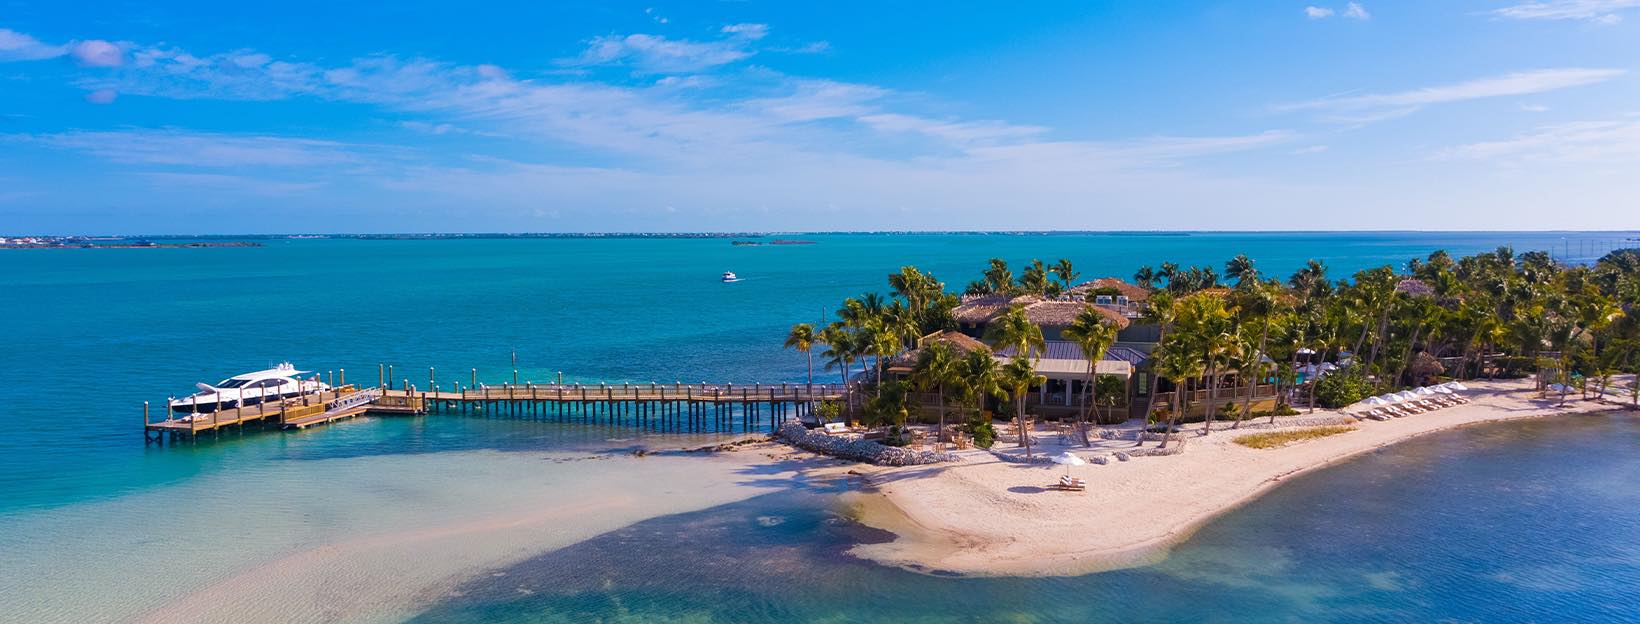 Best All-inclusive Resorts in the USA